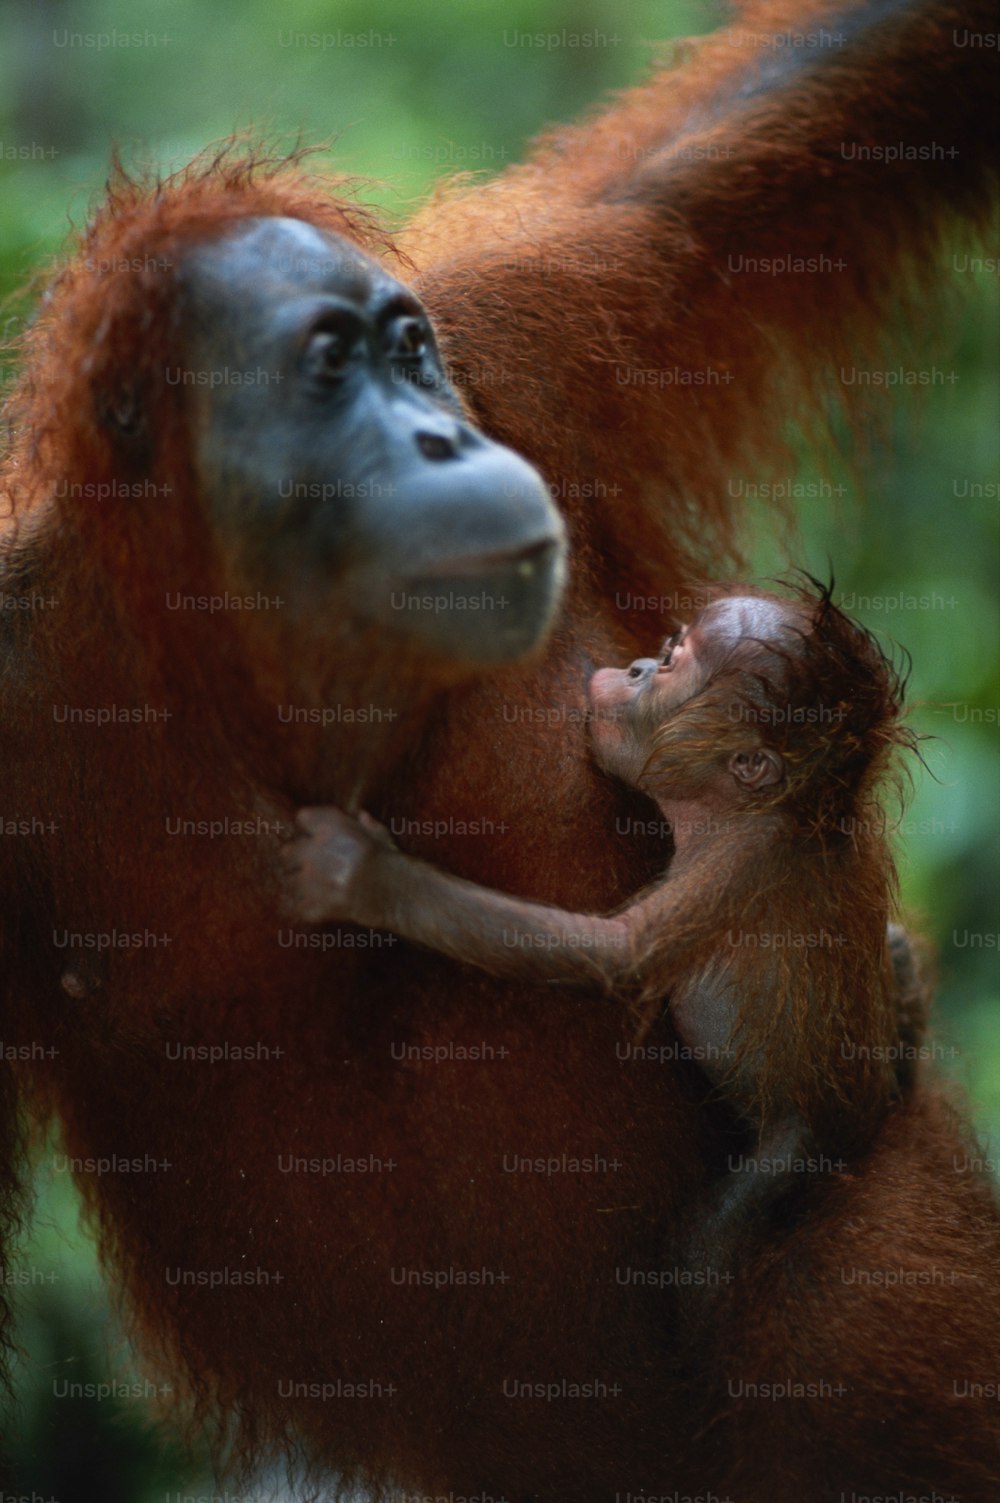 a baby oranguel holding on to an adult oranguel